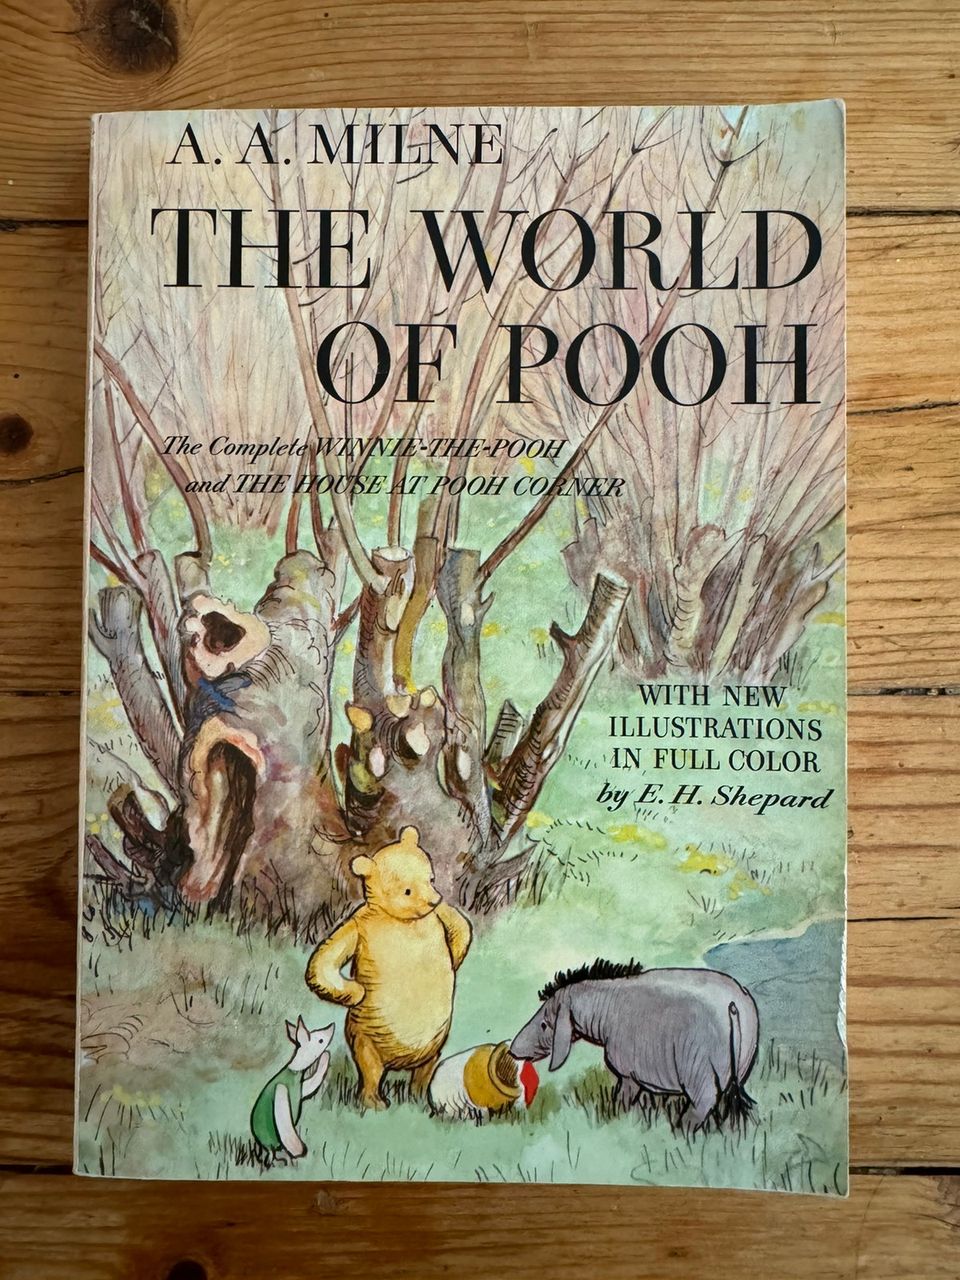 The World of Pooh - A. A. Milne